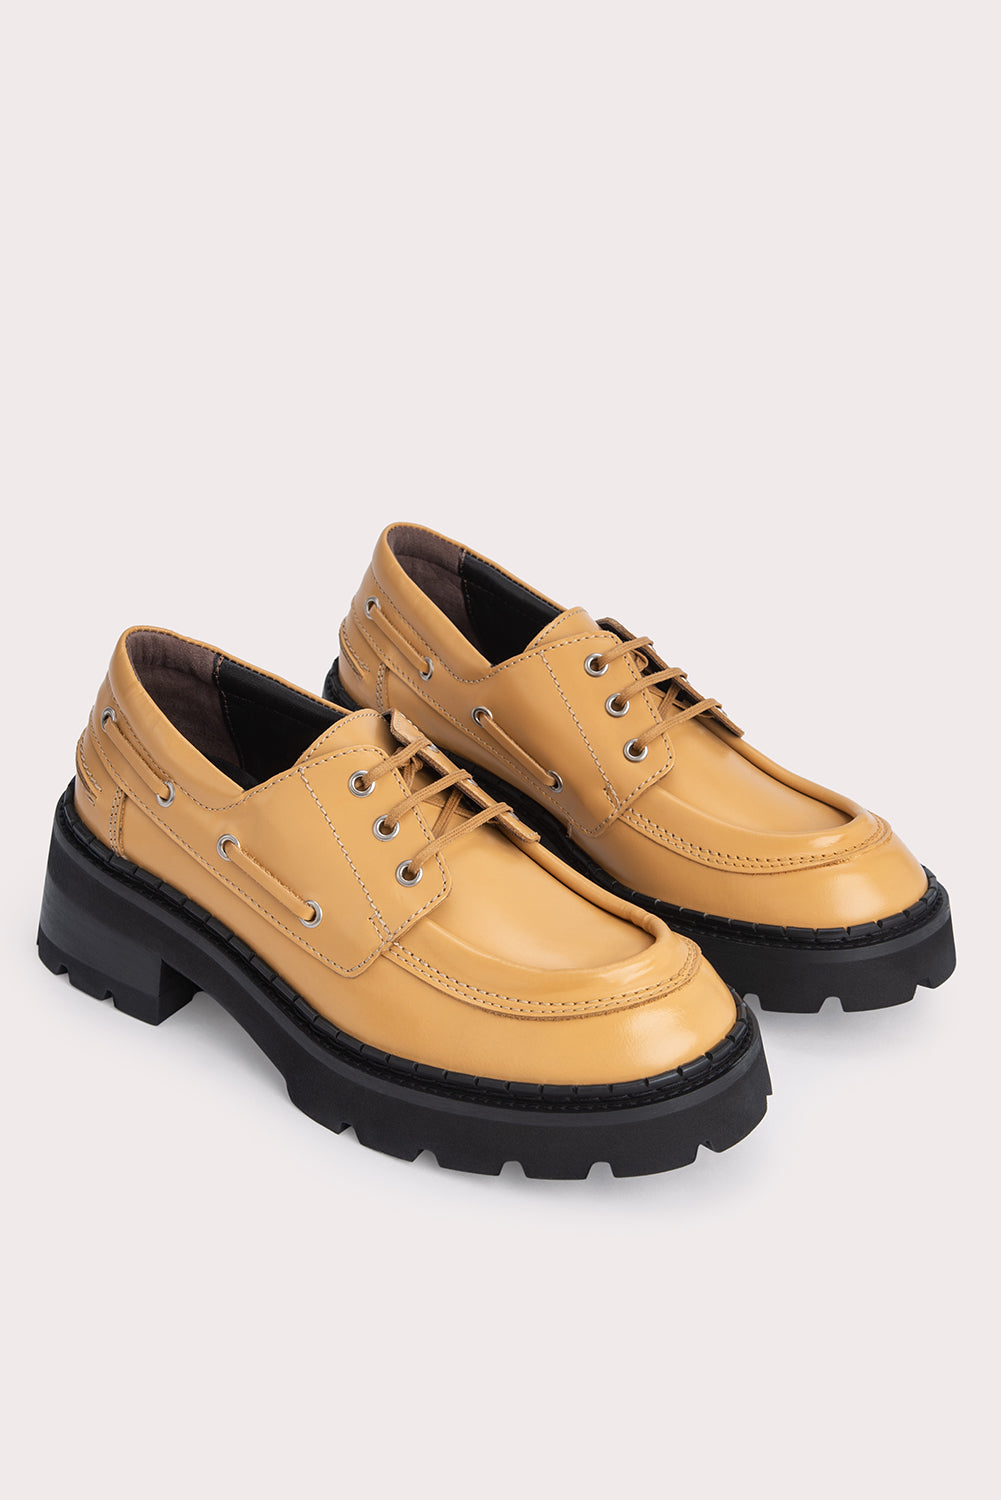 Stanley Biscuit Semi Patent Leather – BY FAR